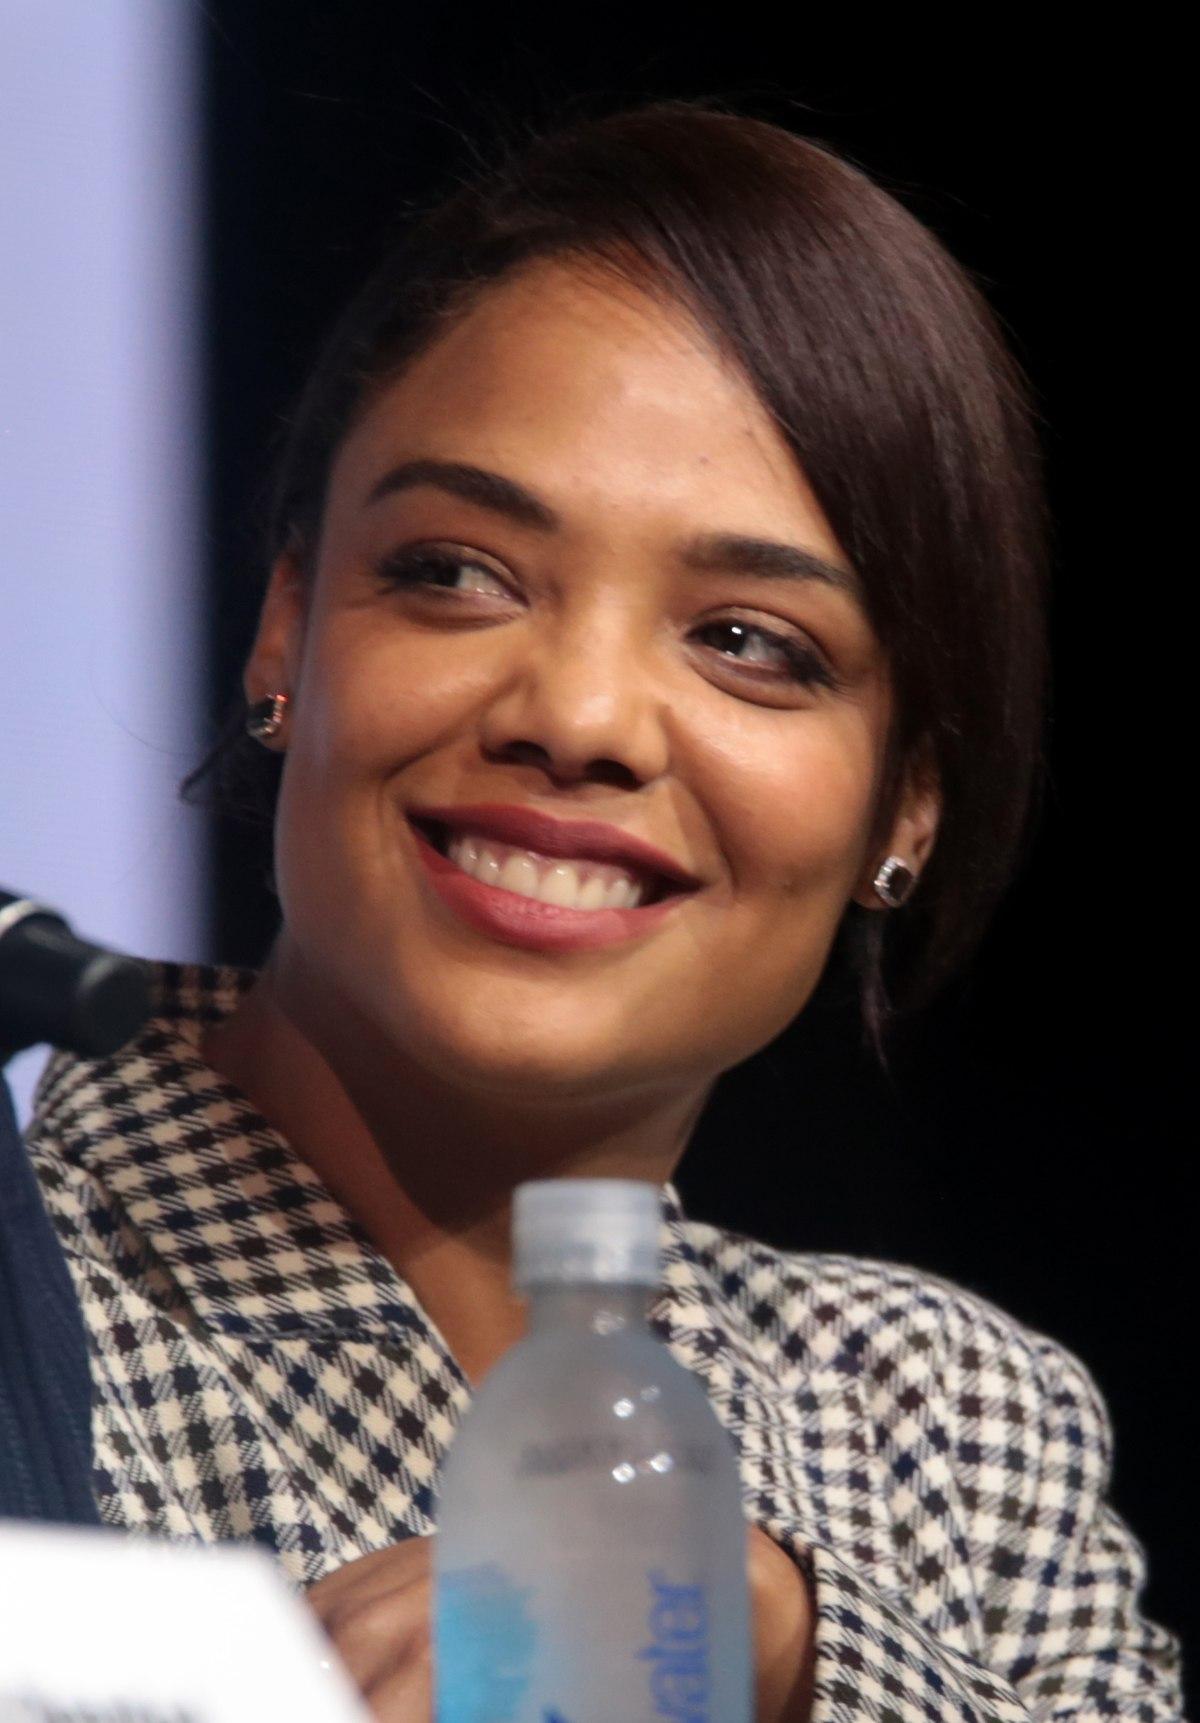 61 Sexy Tessa Thompson Boobs Pictures That Are A Sight For Sore Eyes | Best Of Comic Books